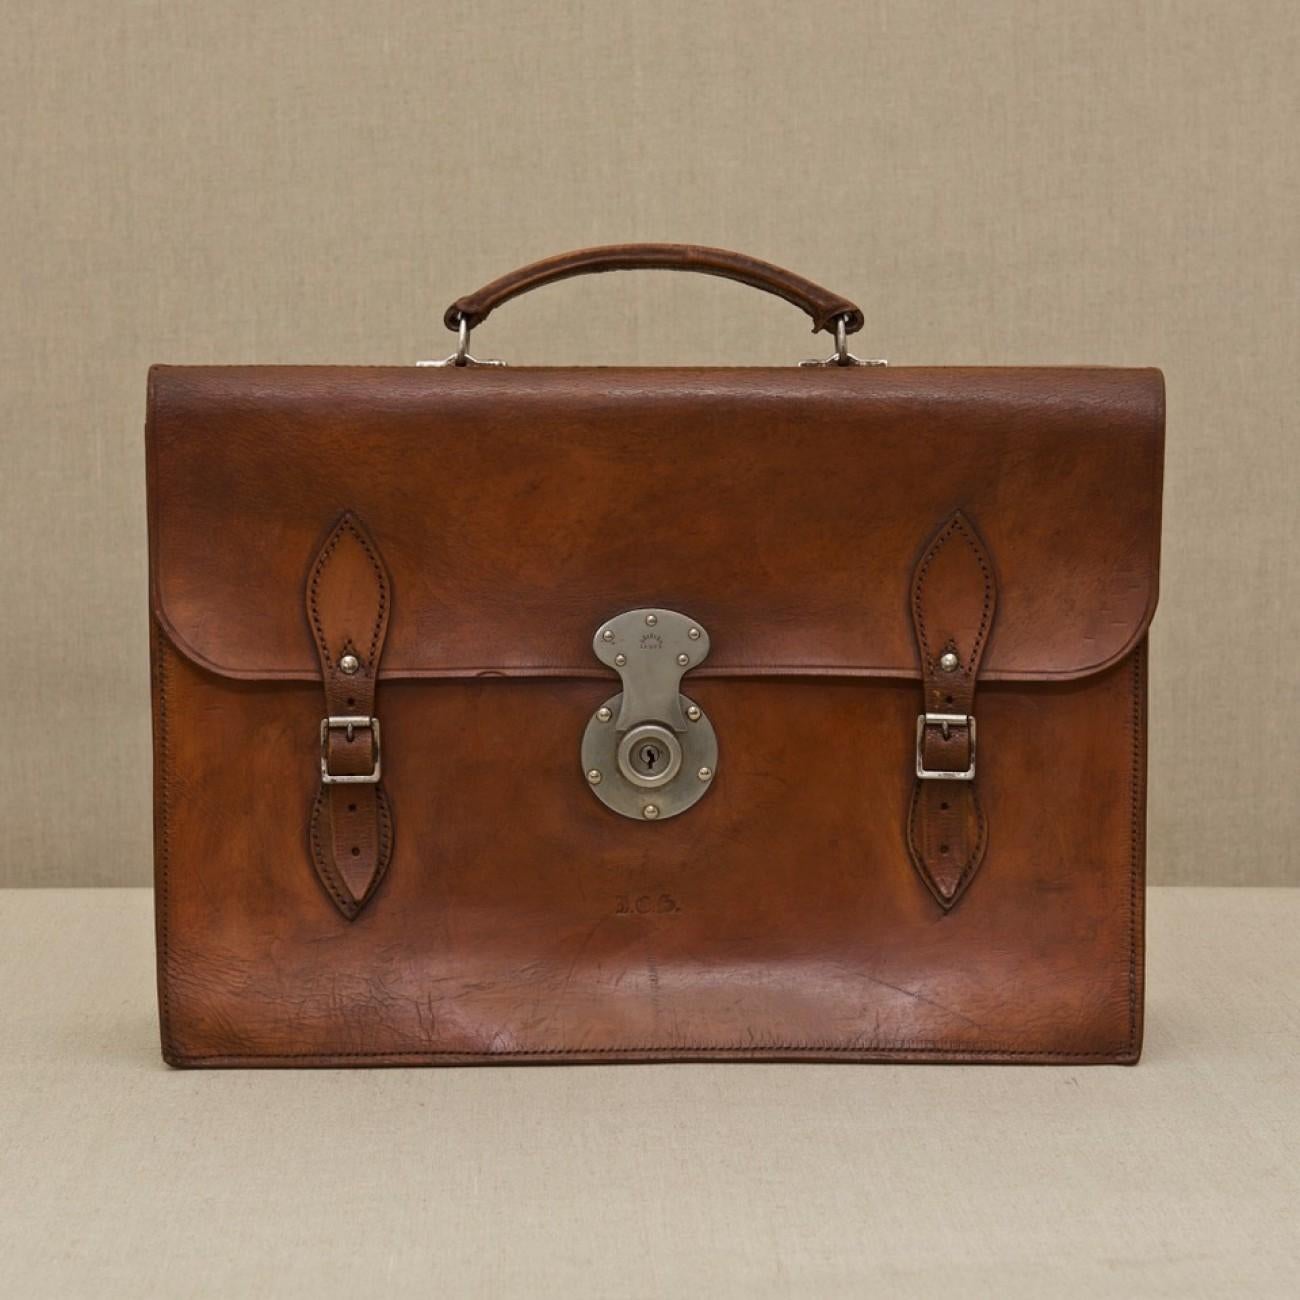 A handsome mid tan leather three pocket briefcase with two buckled straps and central nickel-plated catch, circa 1950.

Dimensions: 41.5 cm/16? inches (length) x 29 cm/11½ inches (height) x 6.5 cm/2½ inches (thick)

Bentleys are Members of LAPADA,